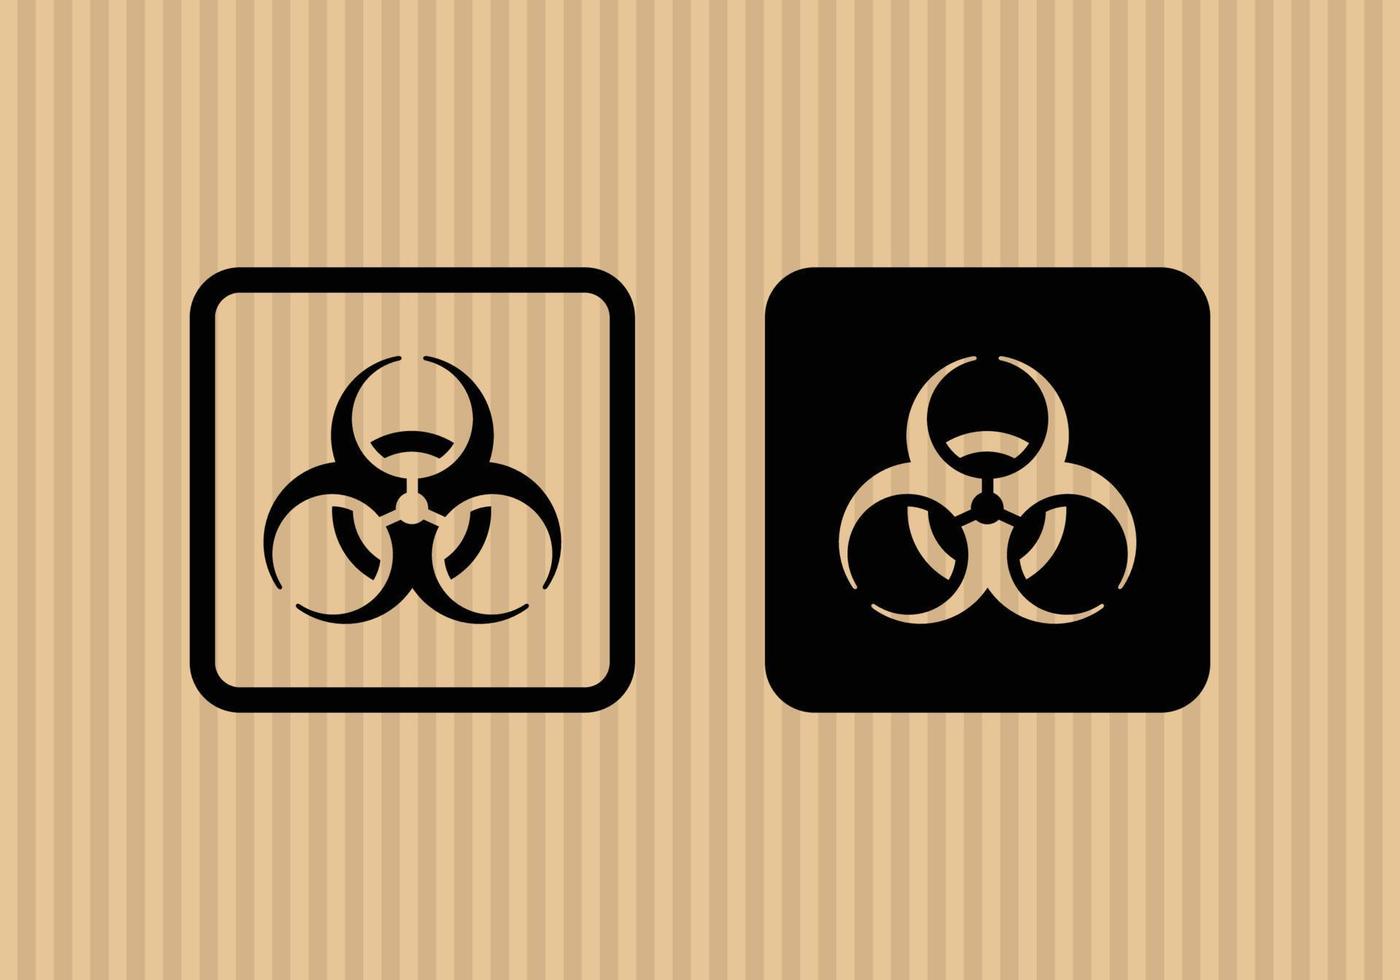 Biohazard simple flat icon vector illustration with cardboard texture background